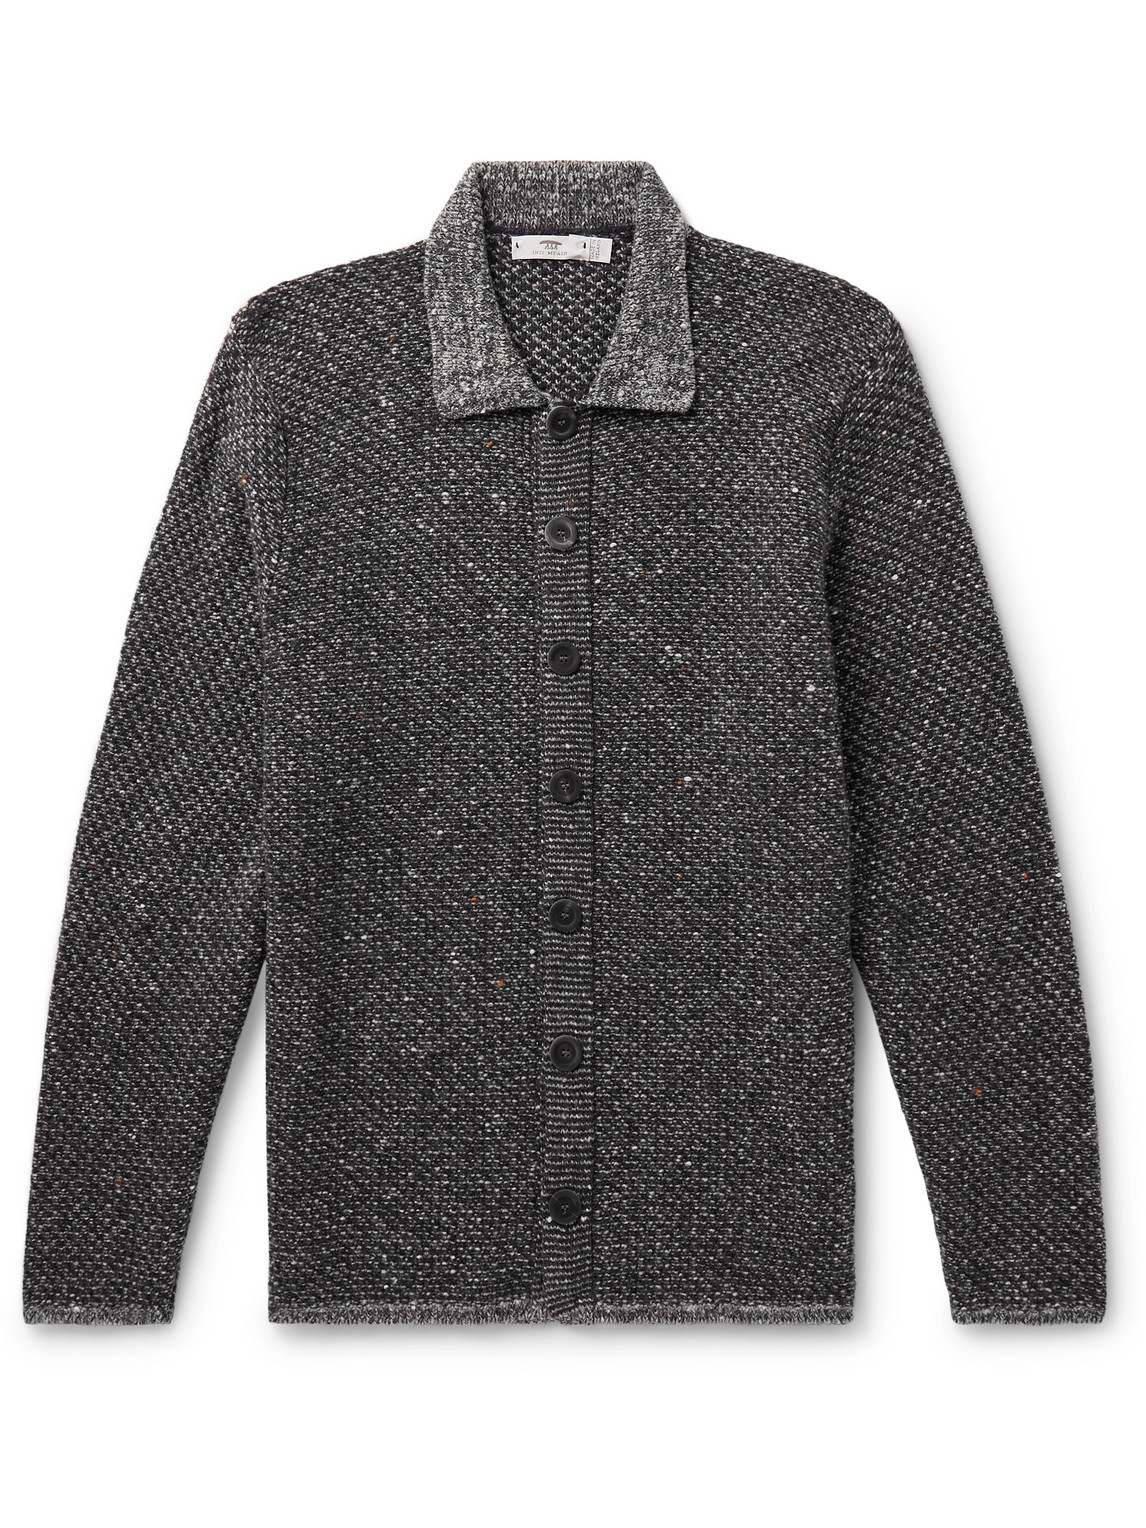 Inis Meain Donegal Merino Wool And Cashmere-blend Shirt Jacket In 23 Charcoal